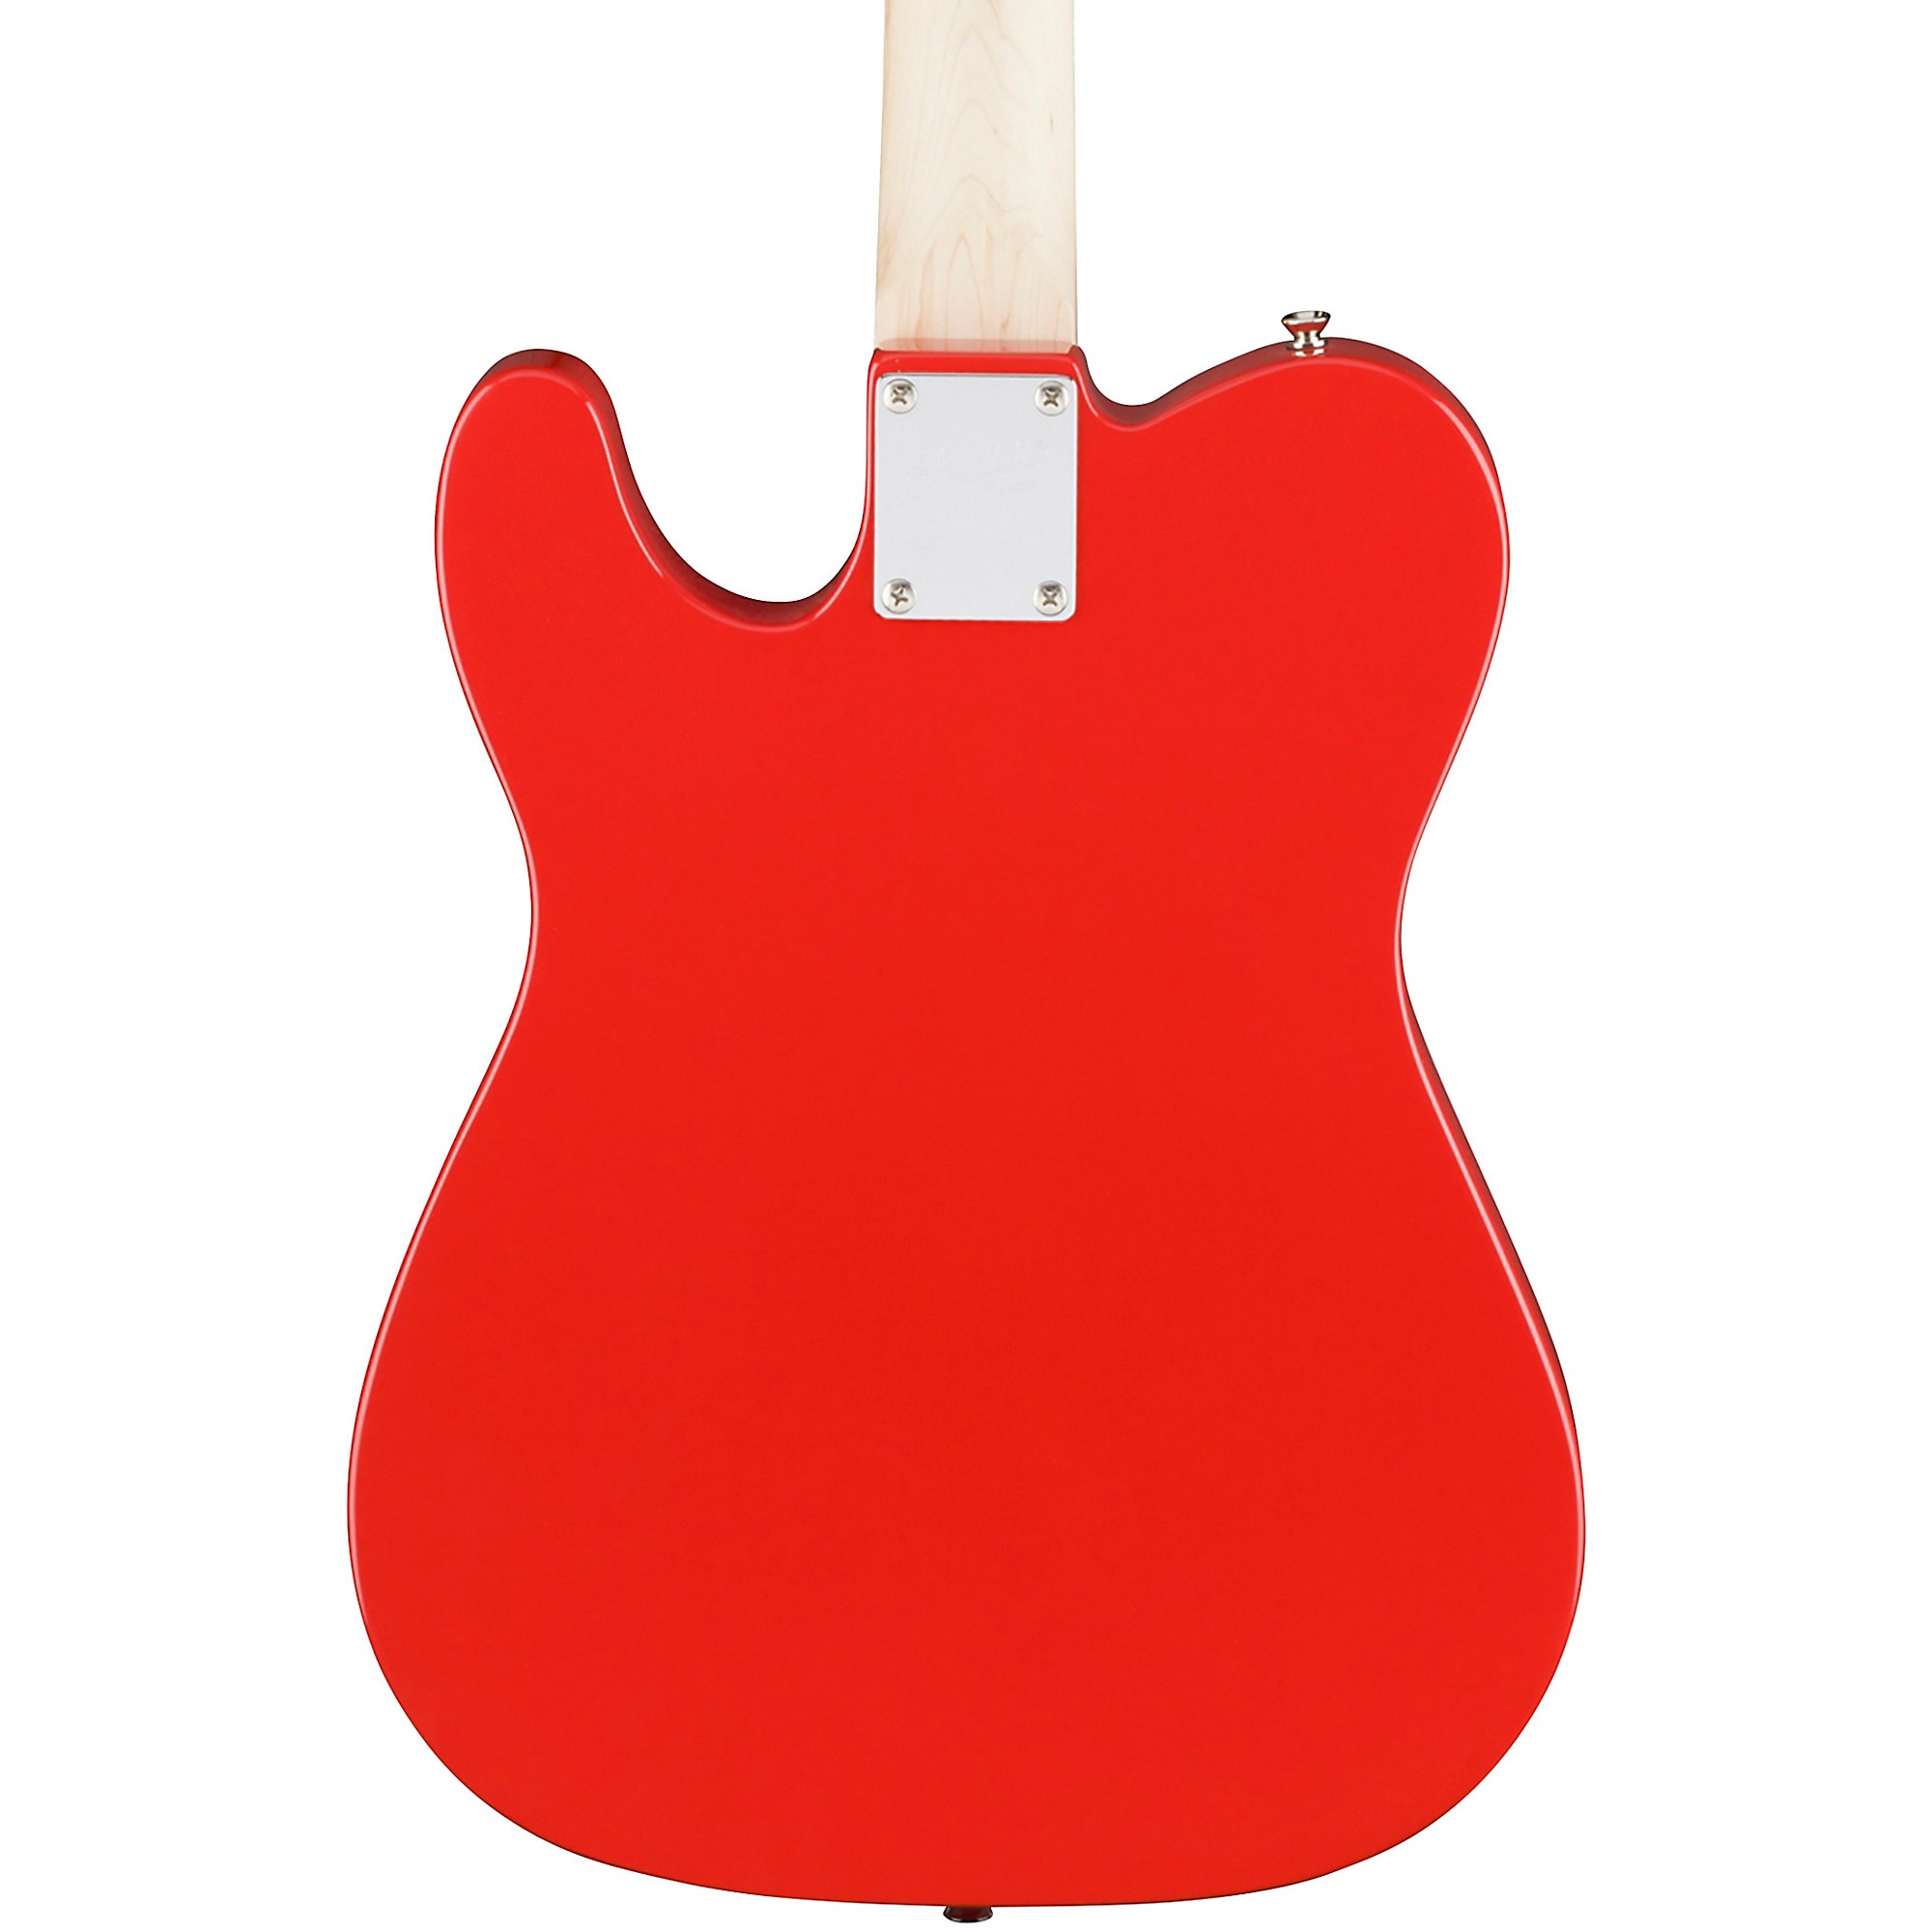 Squier Affinity Telecaster Electric Guitar Race Red | Guitar Center